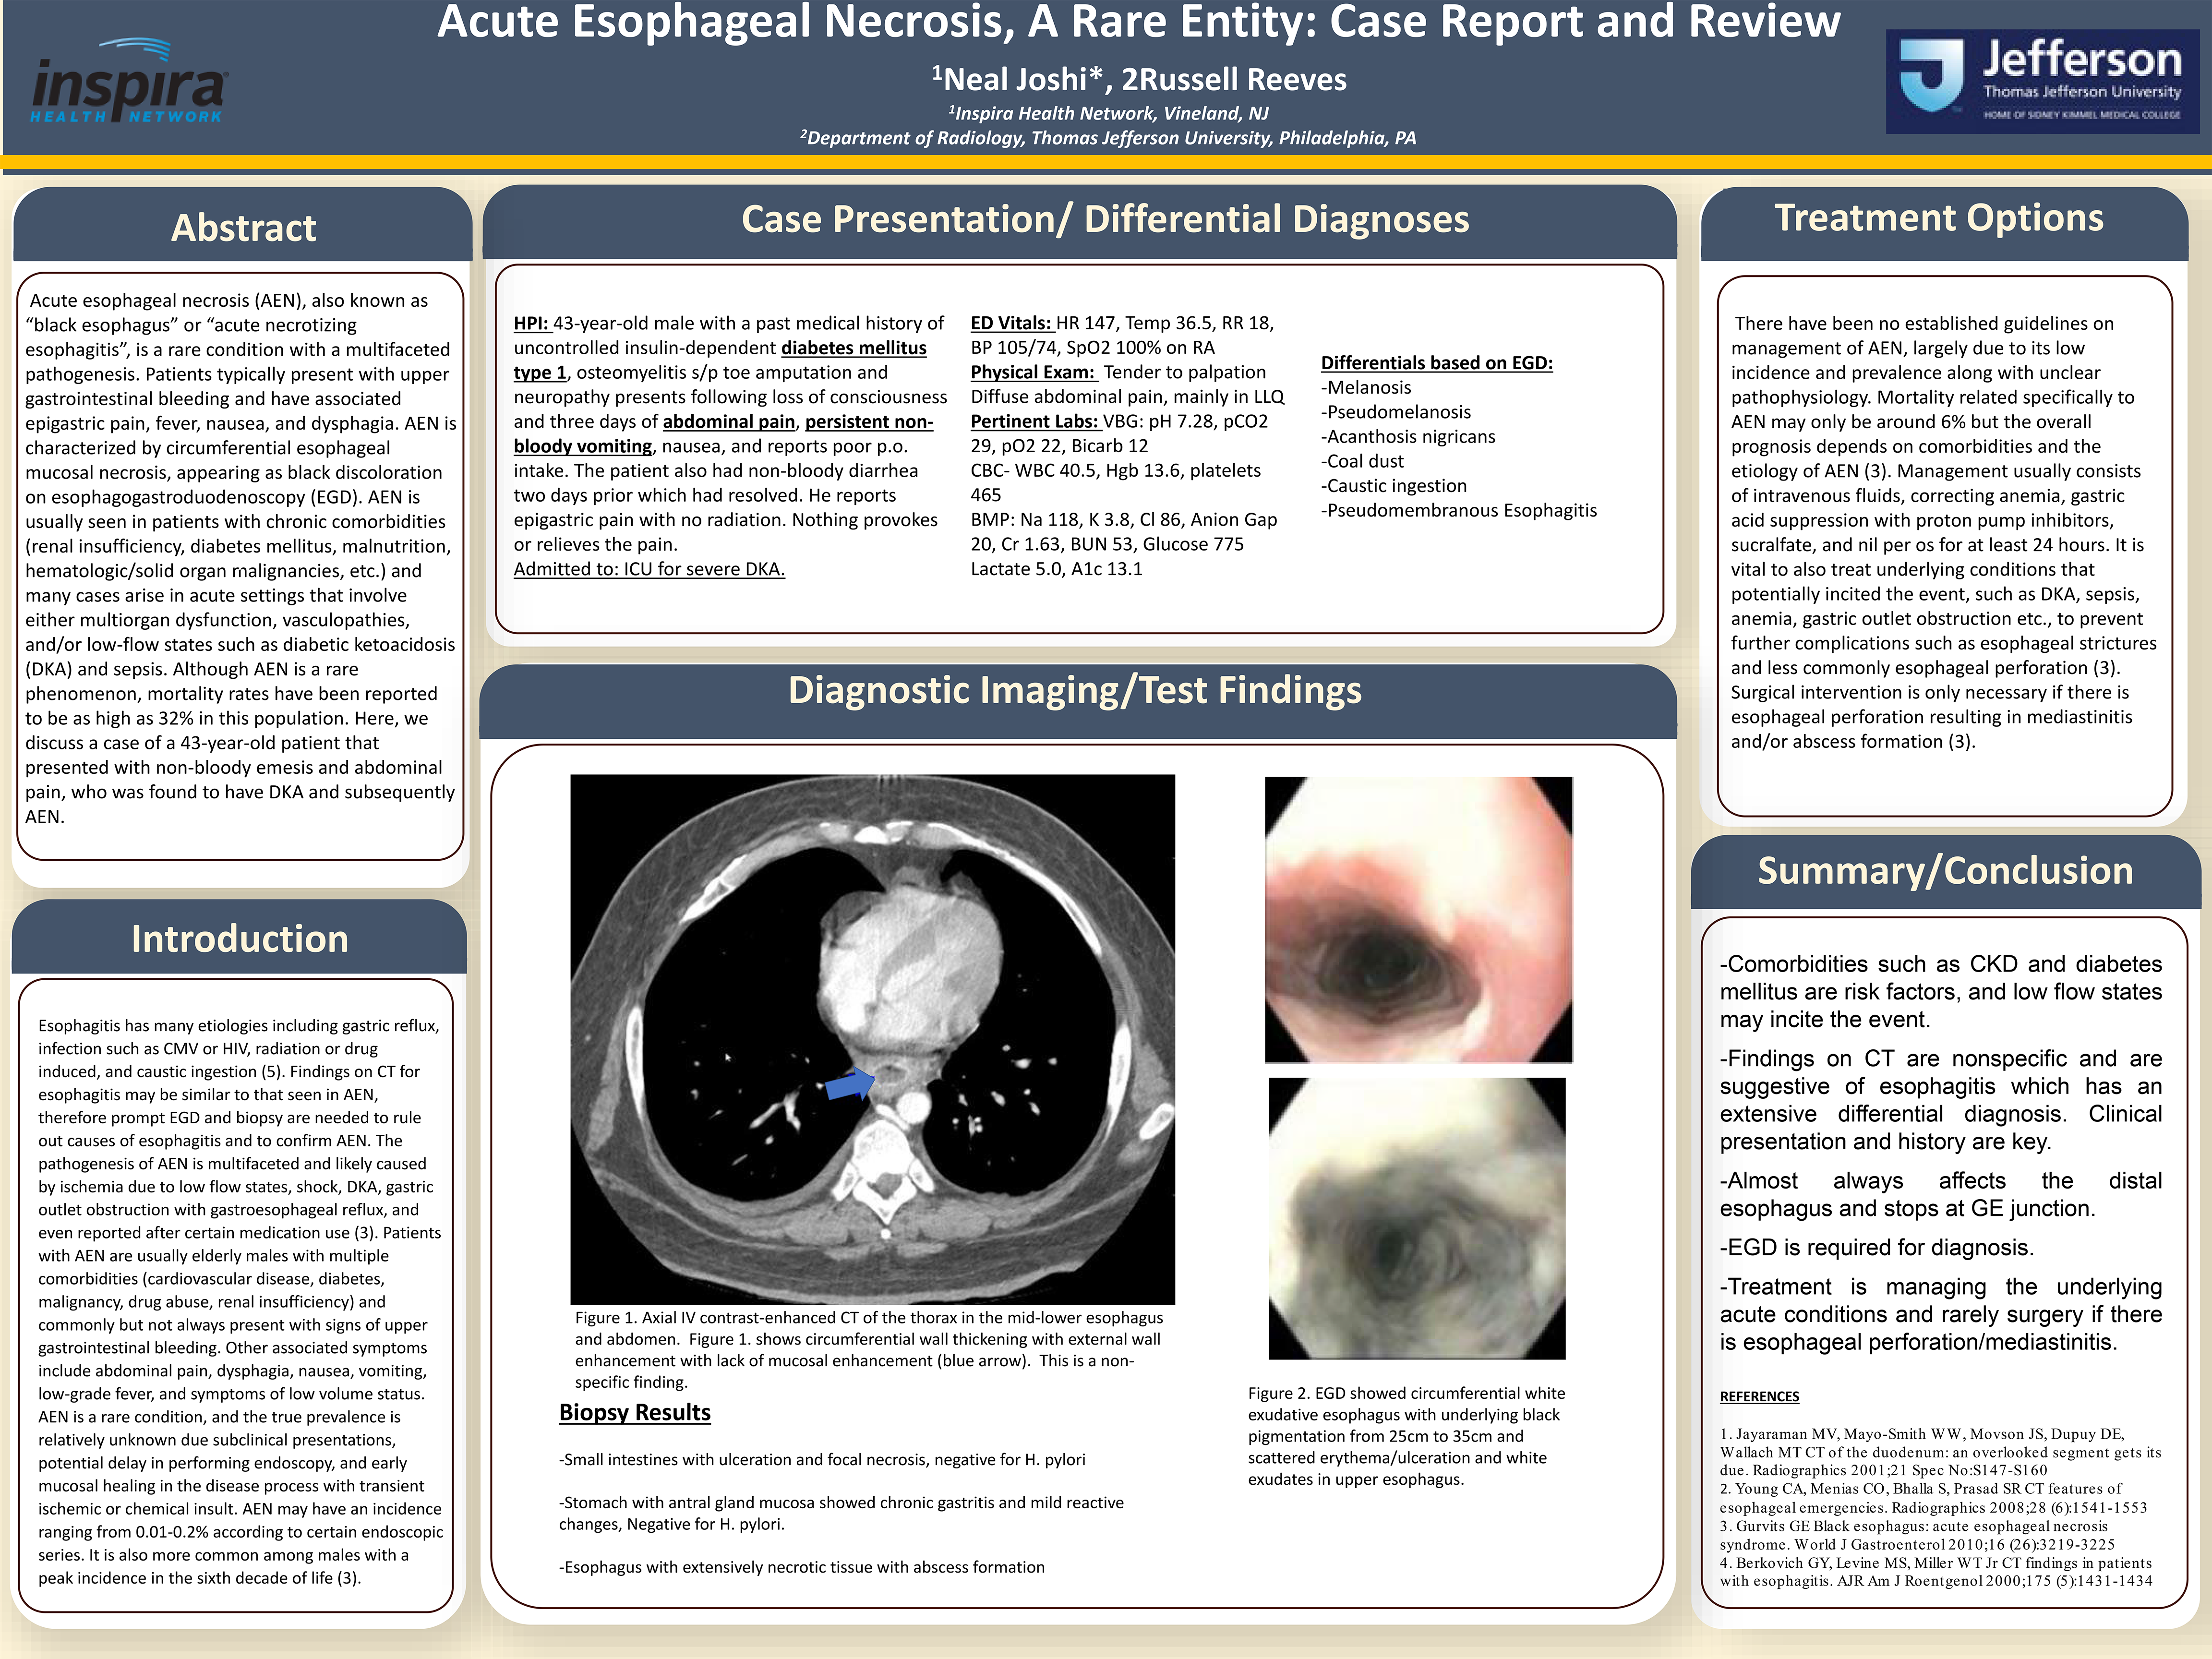 Acute Esophageal Necrosis, A Rare Entity: Case Report and Review